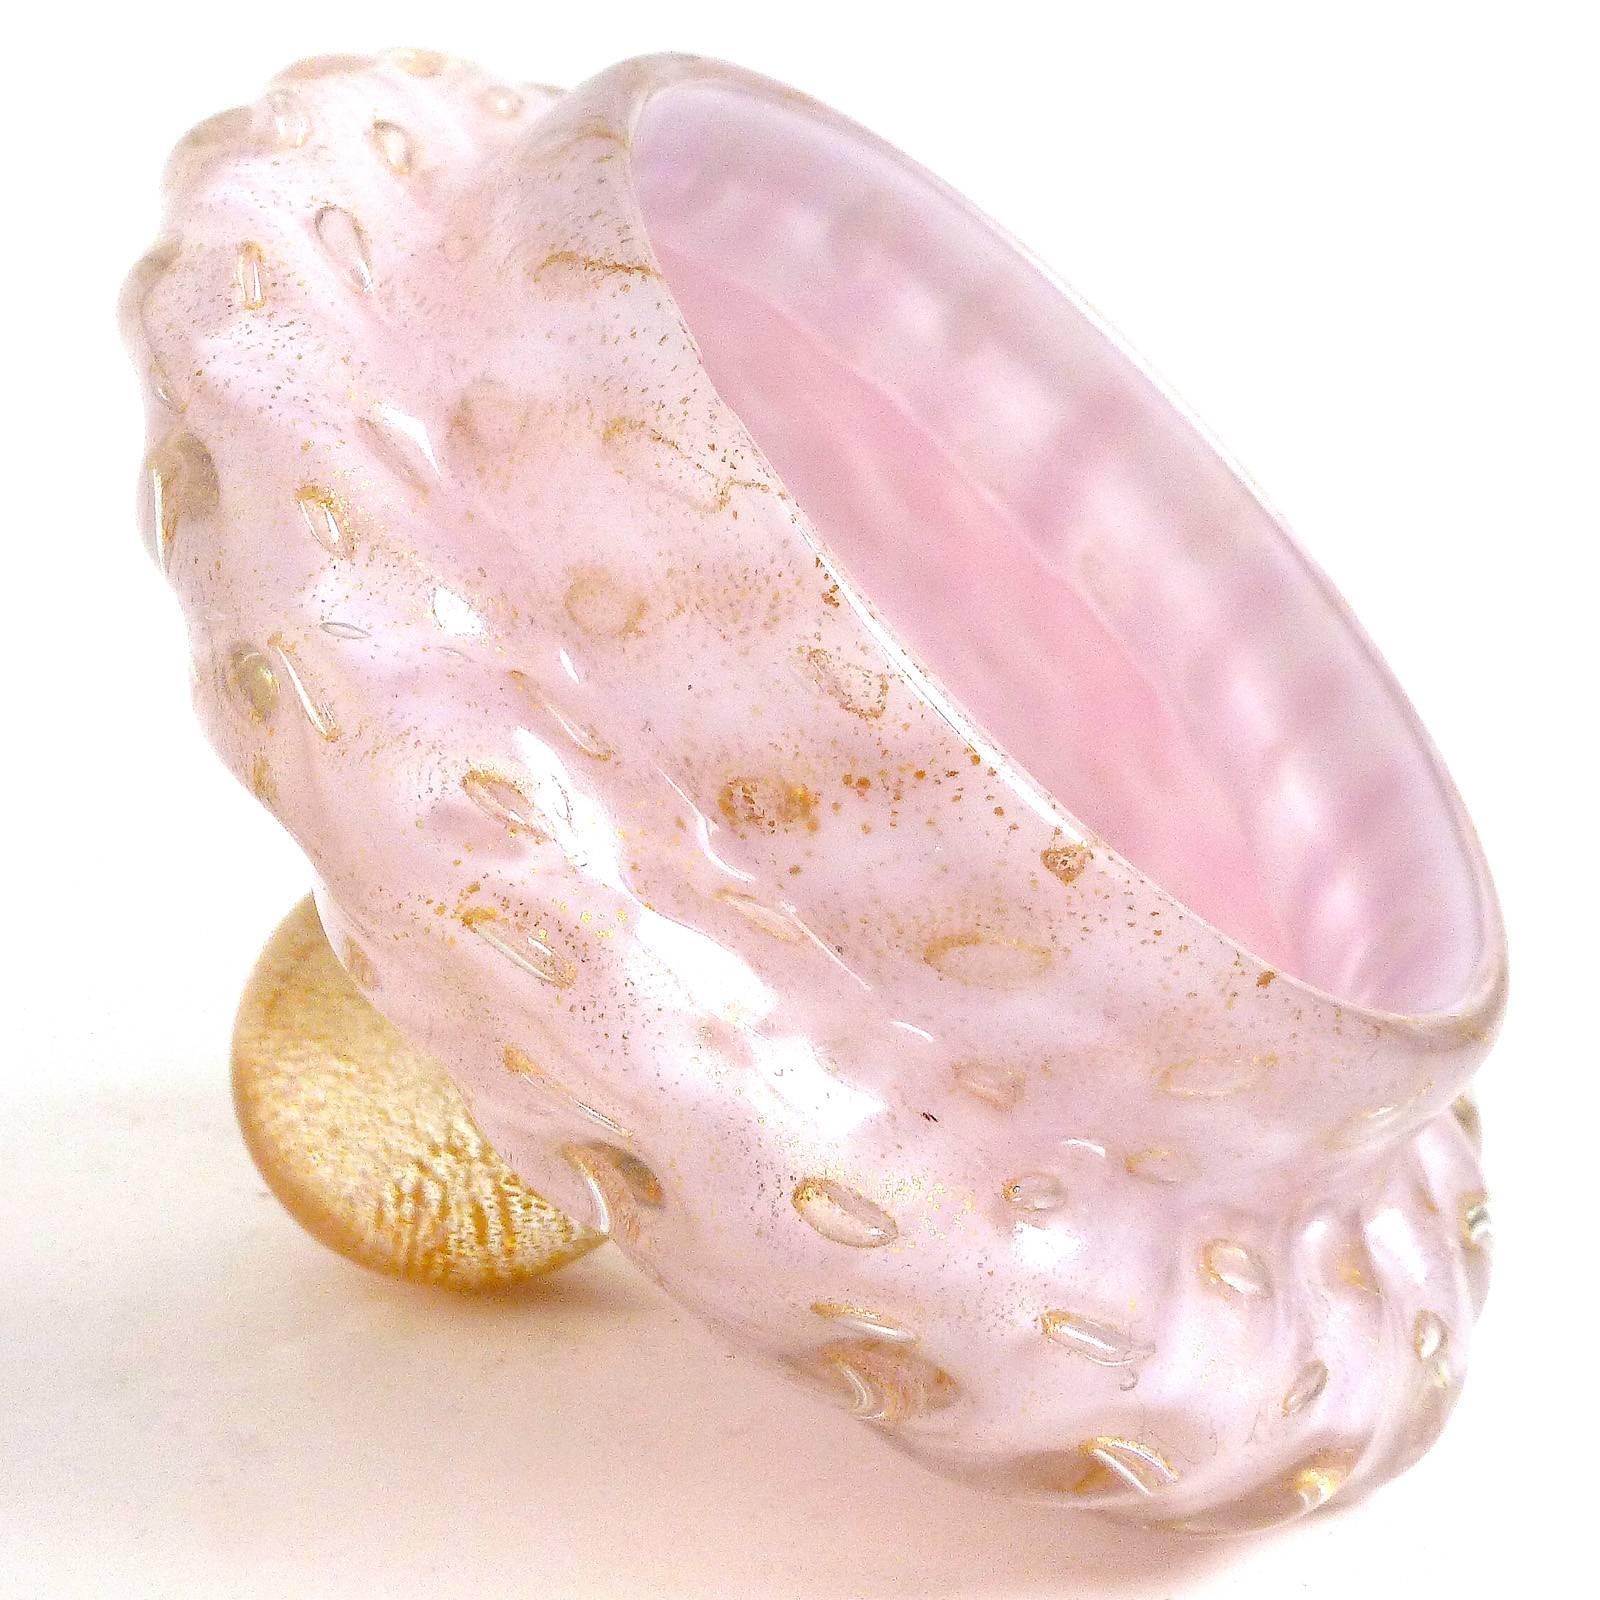 Free shipping worldwide! See details below description.

Beautiful and large Murano handblown pink, gold flecks and controlled bubbles art glass ribbed vanity powder box. Documented to designer Alfredo Barbini, circa 1950s. The piece has a ribbed